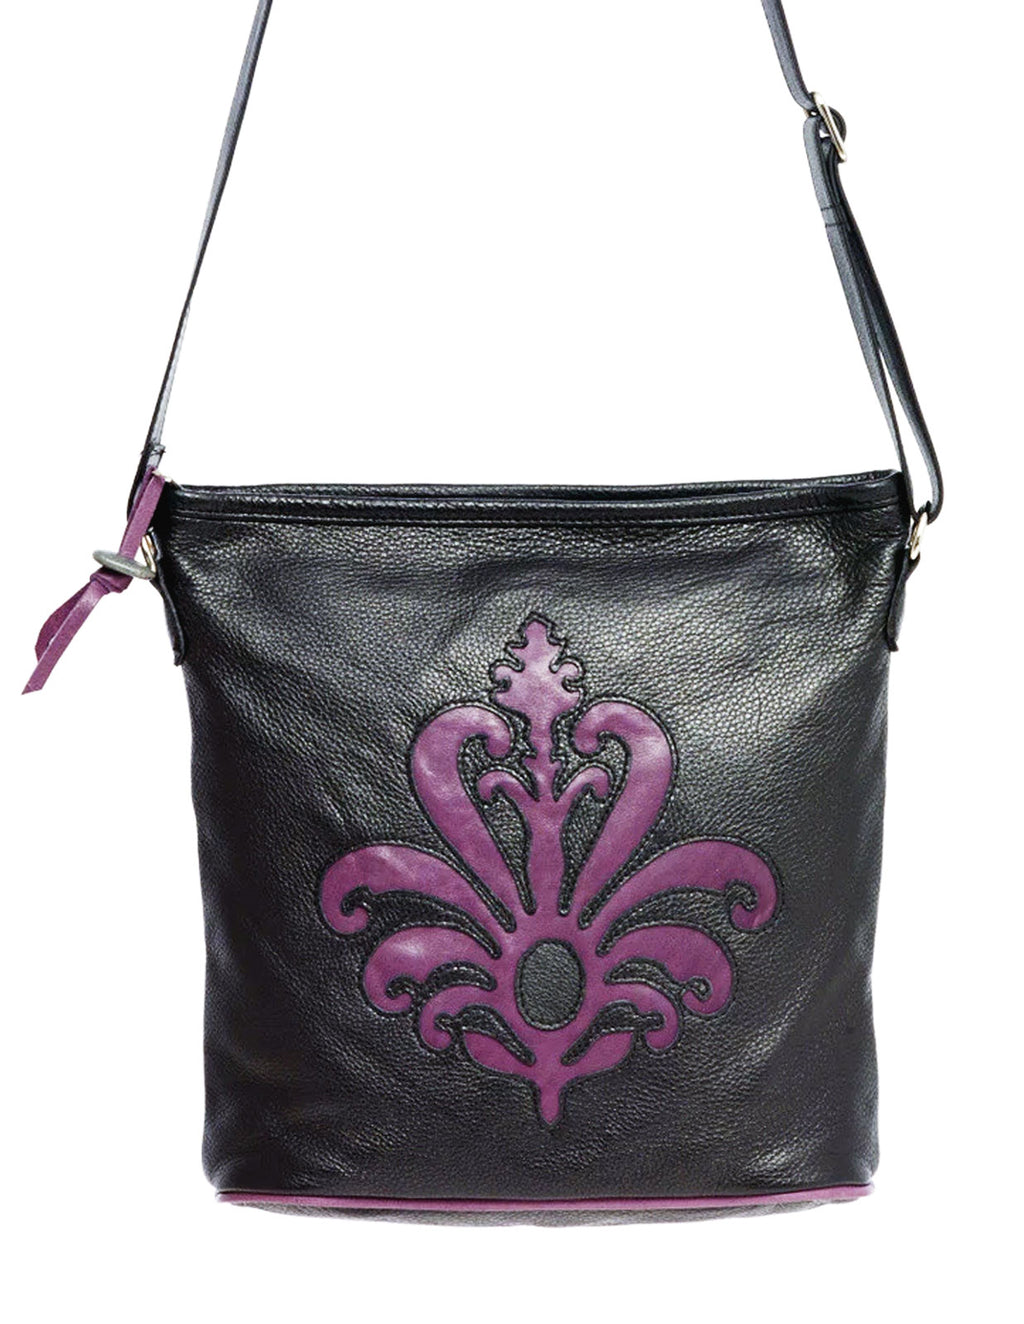 Leather and Paisley Handbag by Allen Solly, Italy 